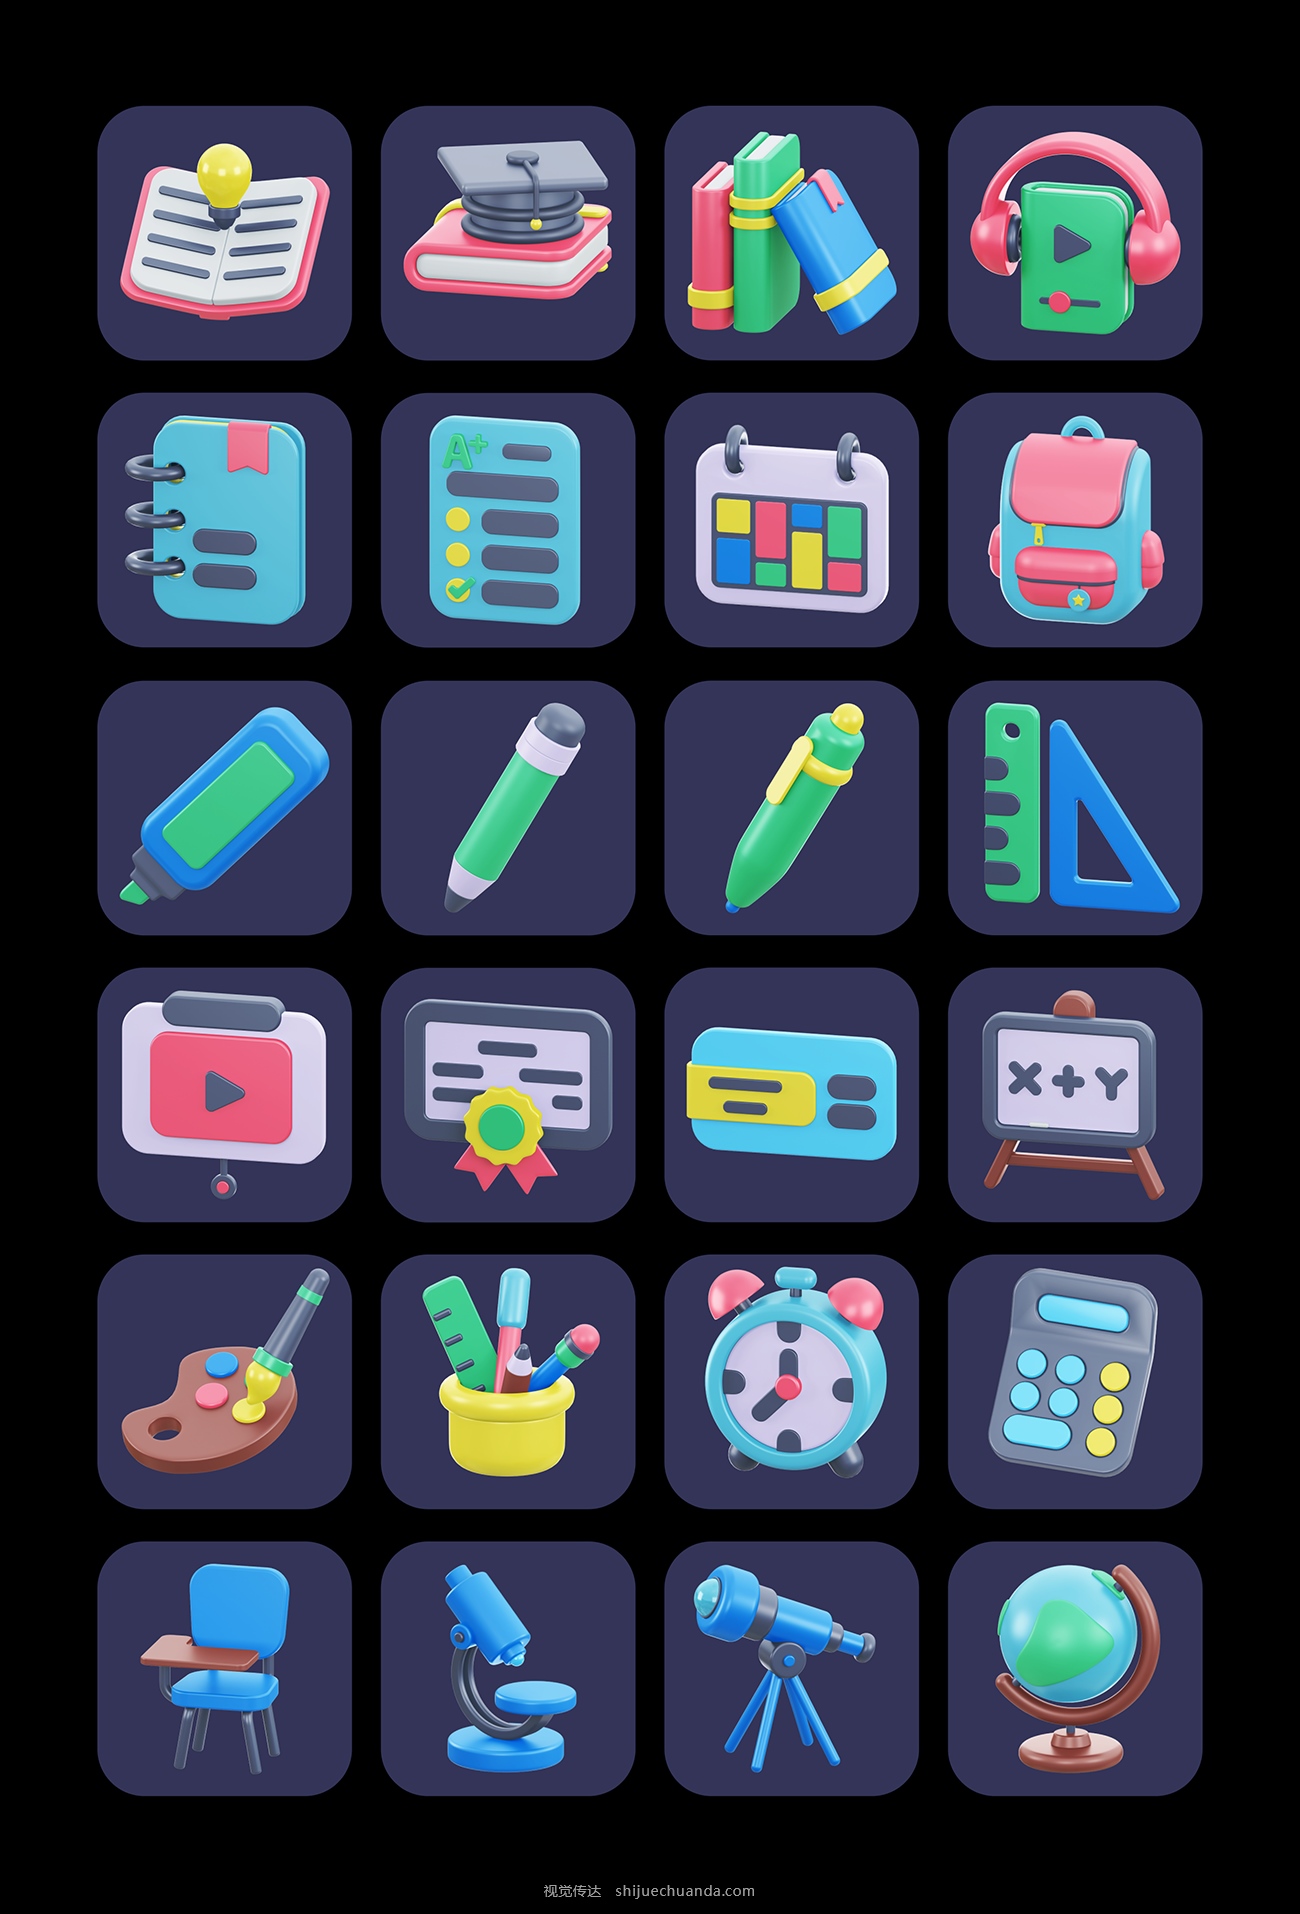 Education 3D icon pack-3.jpg